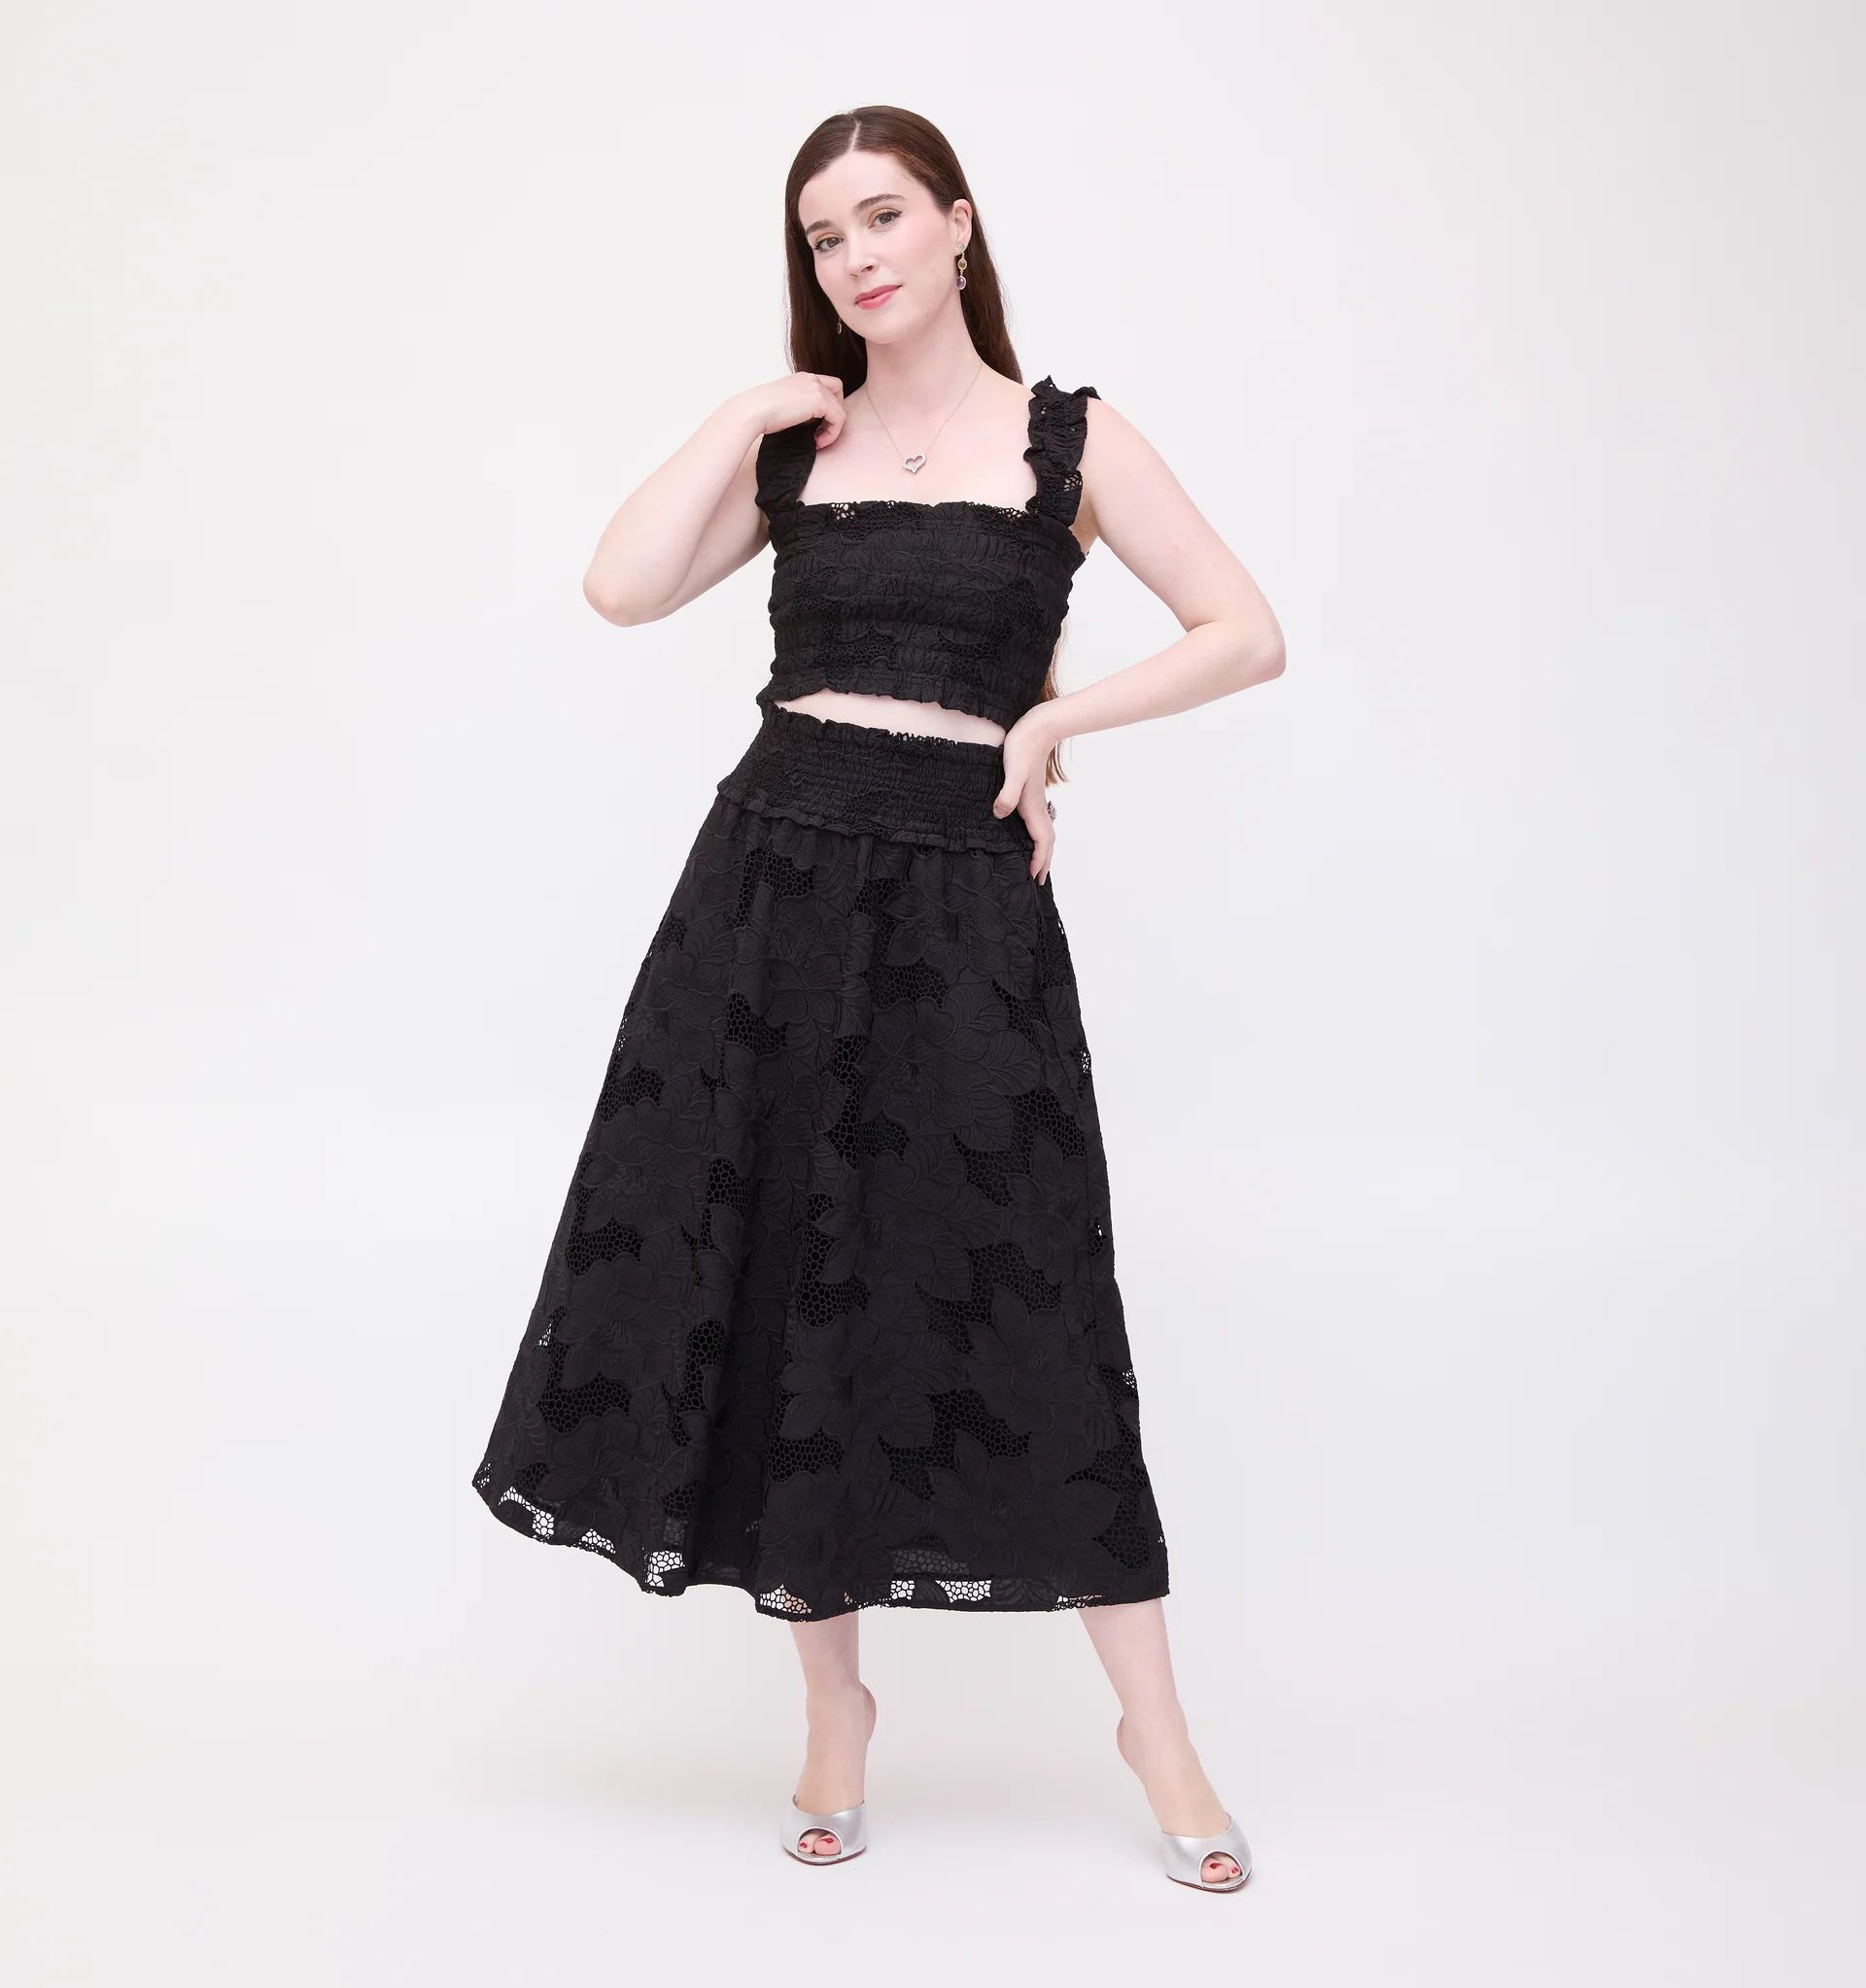 The Delphine Nap Skirt - Black Floral Lace | Hill House Home